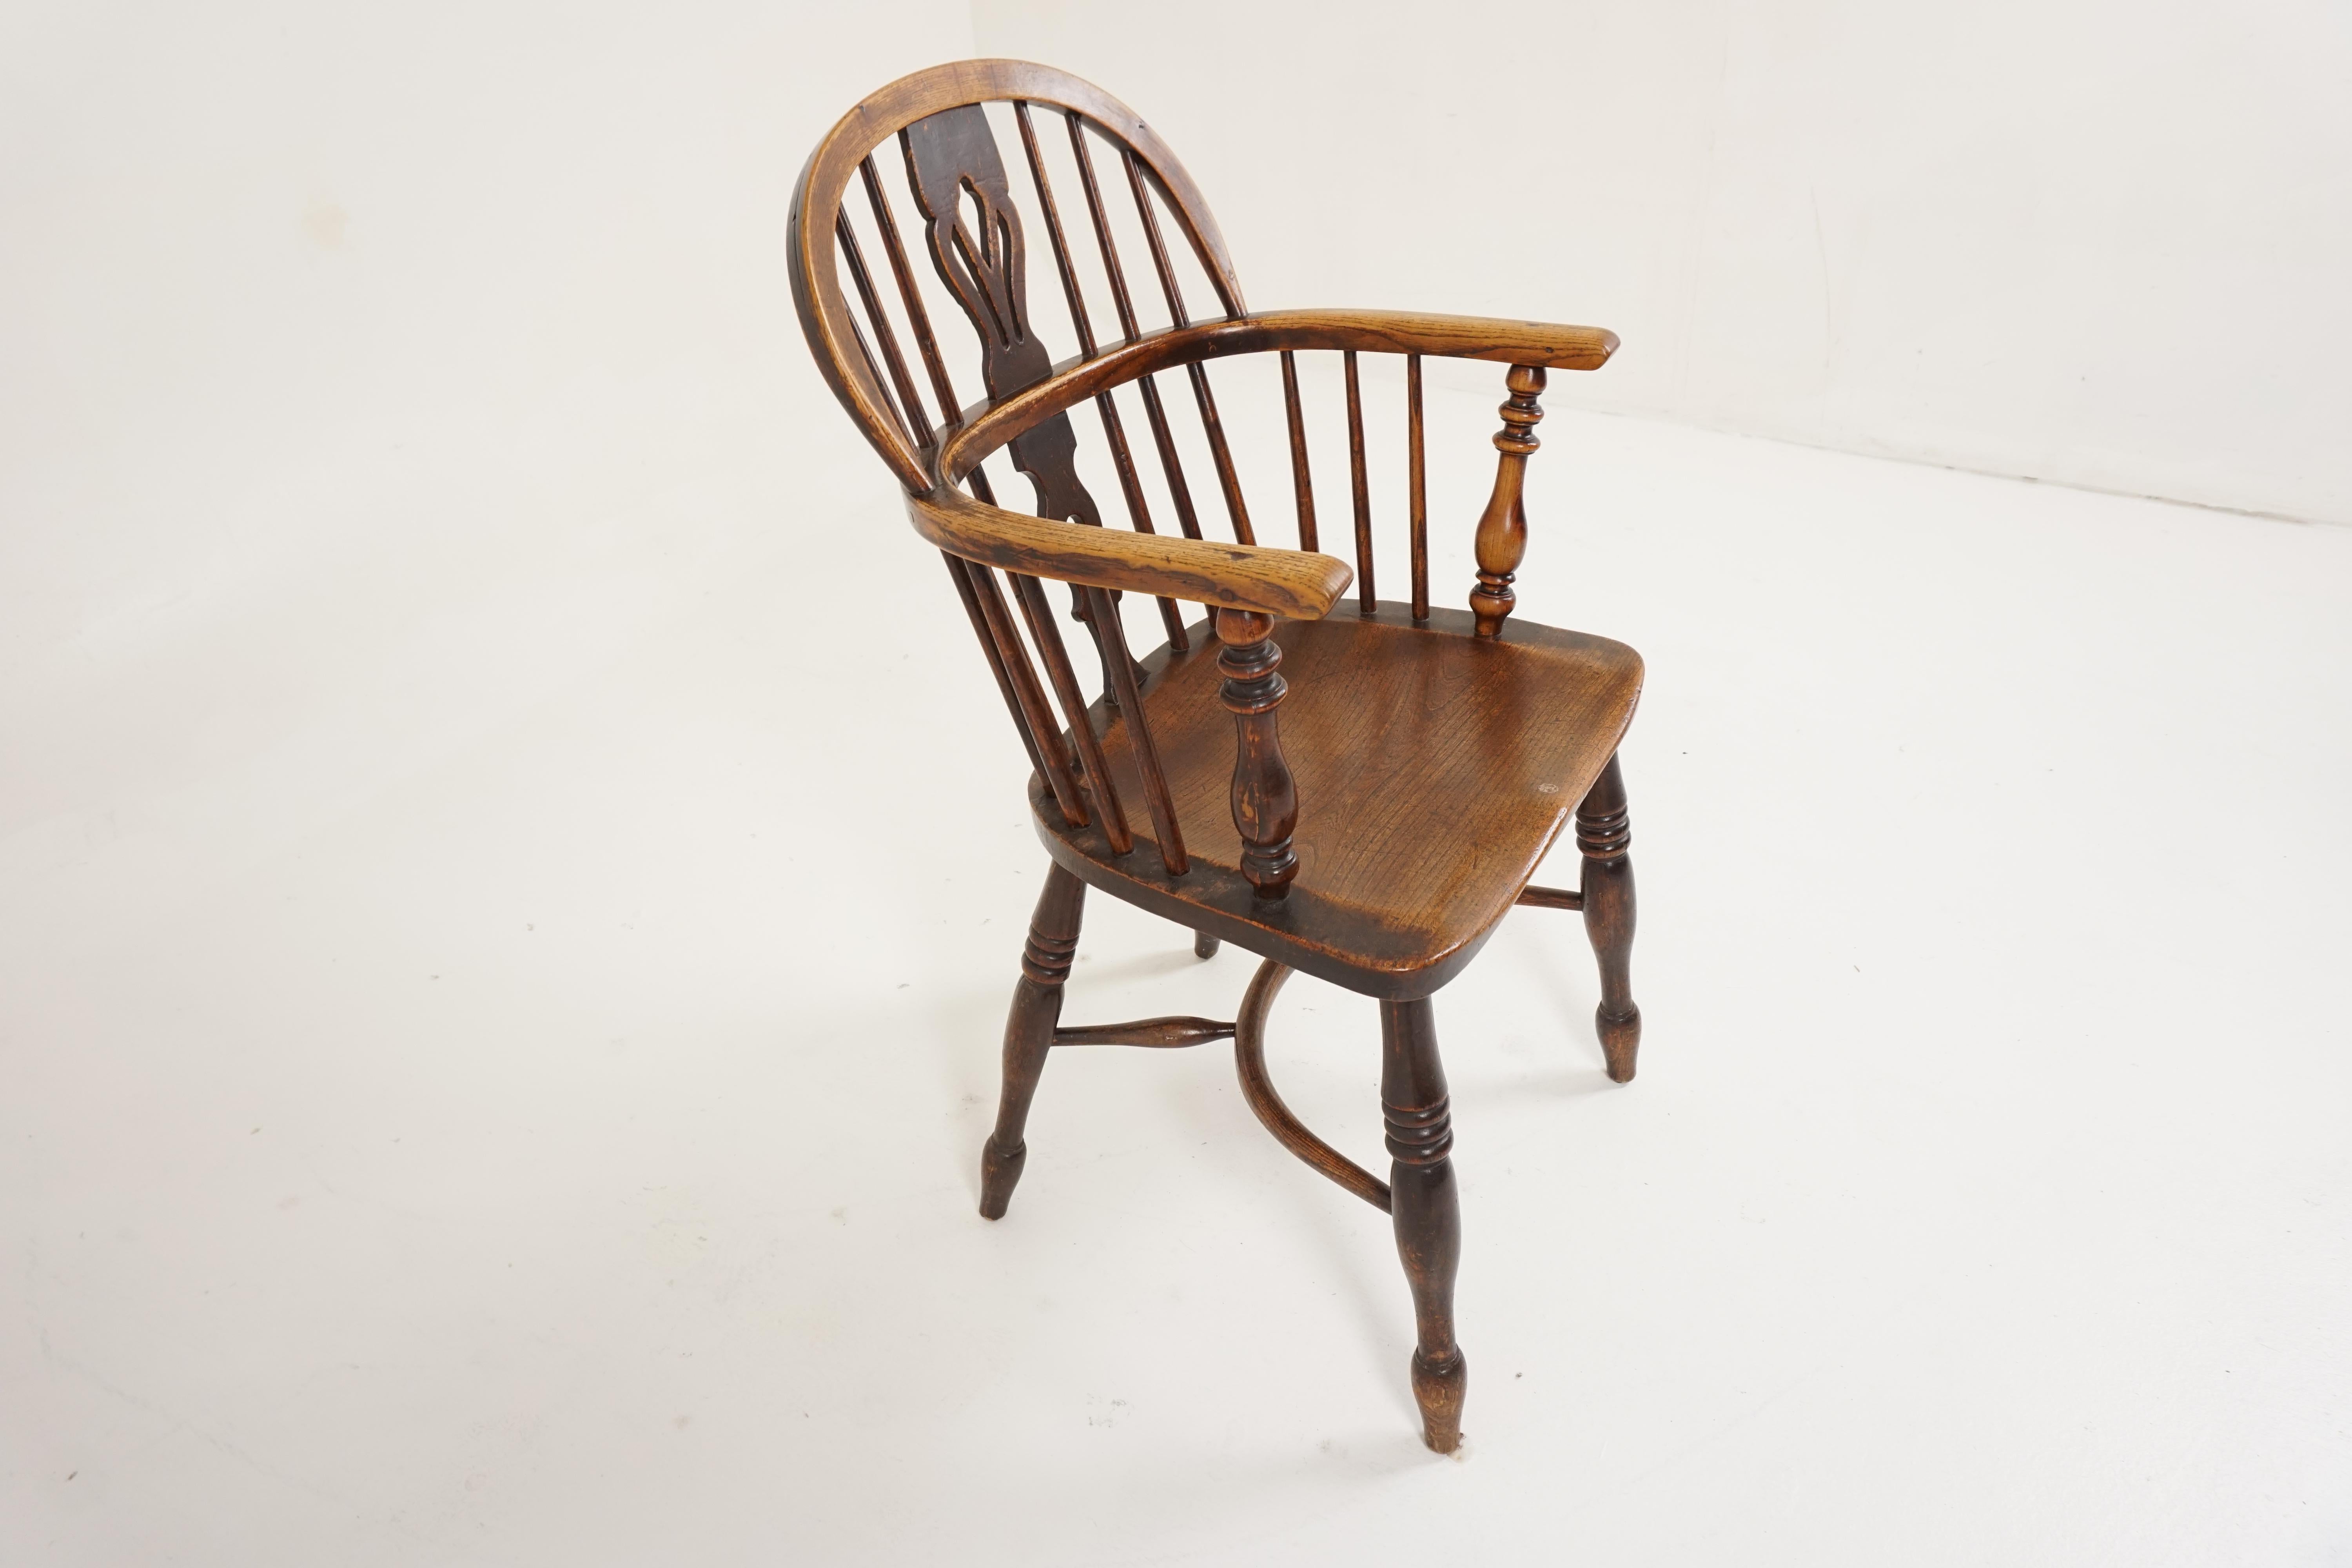 Hand-Crafted Antique Windsor Arm Chair, Country Chair, Elm + Yew, Scotland 1850, H542